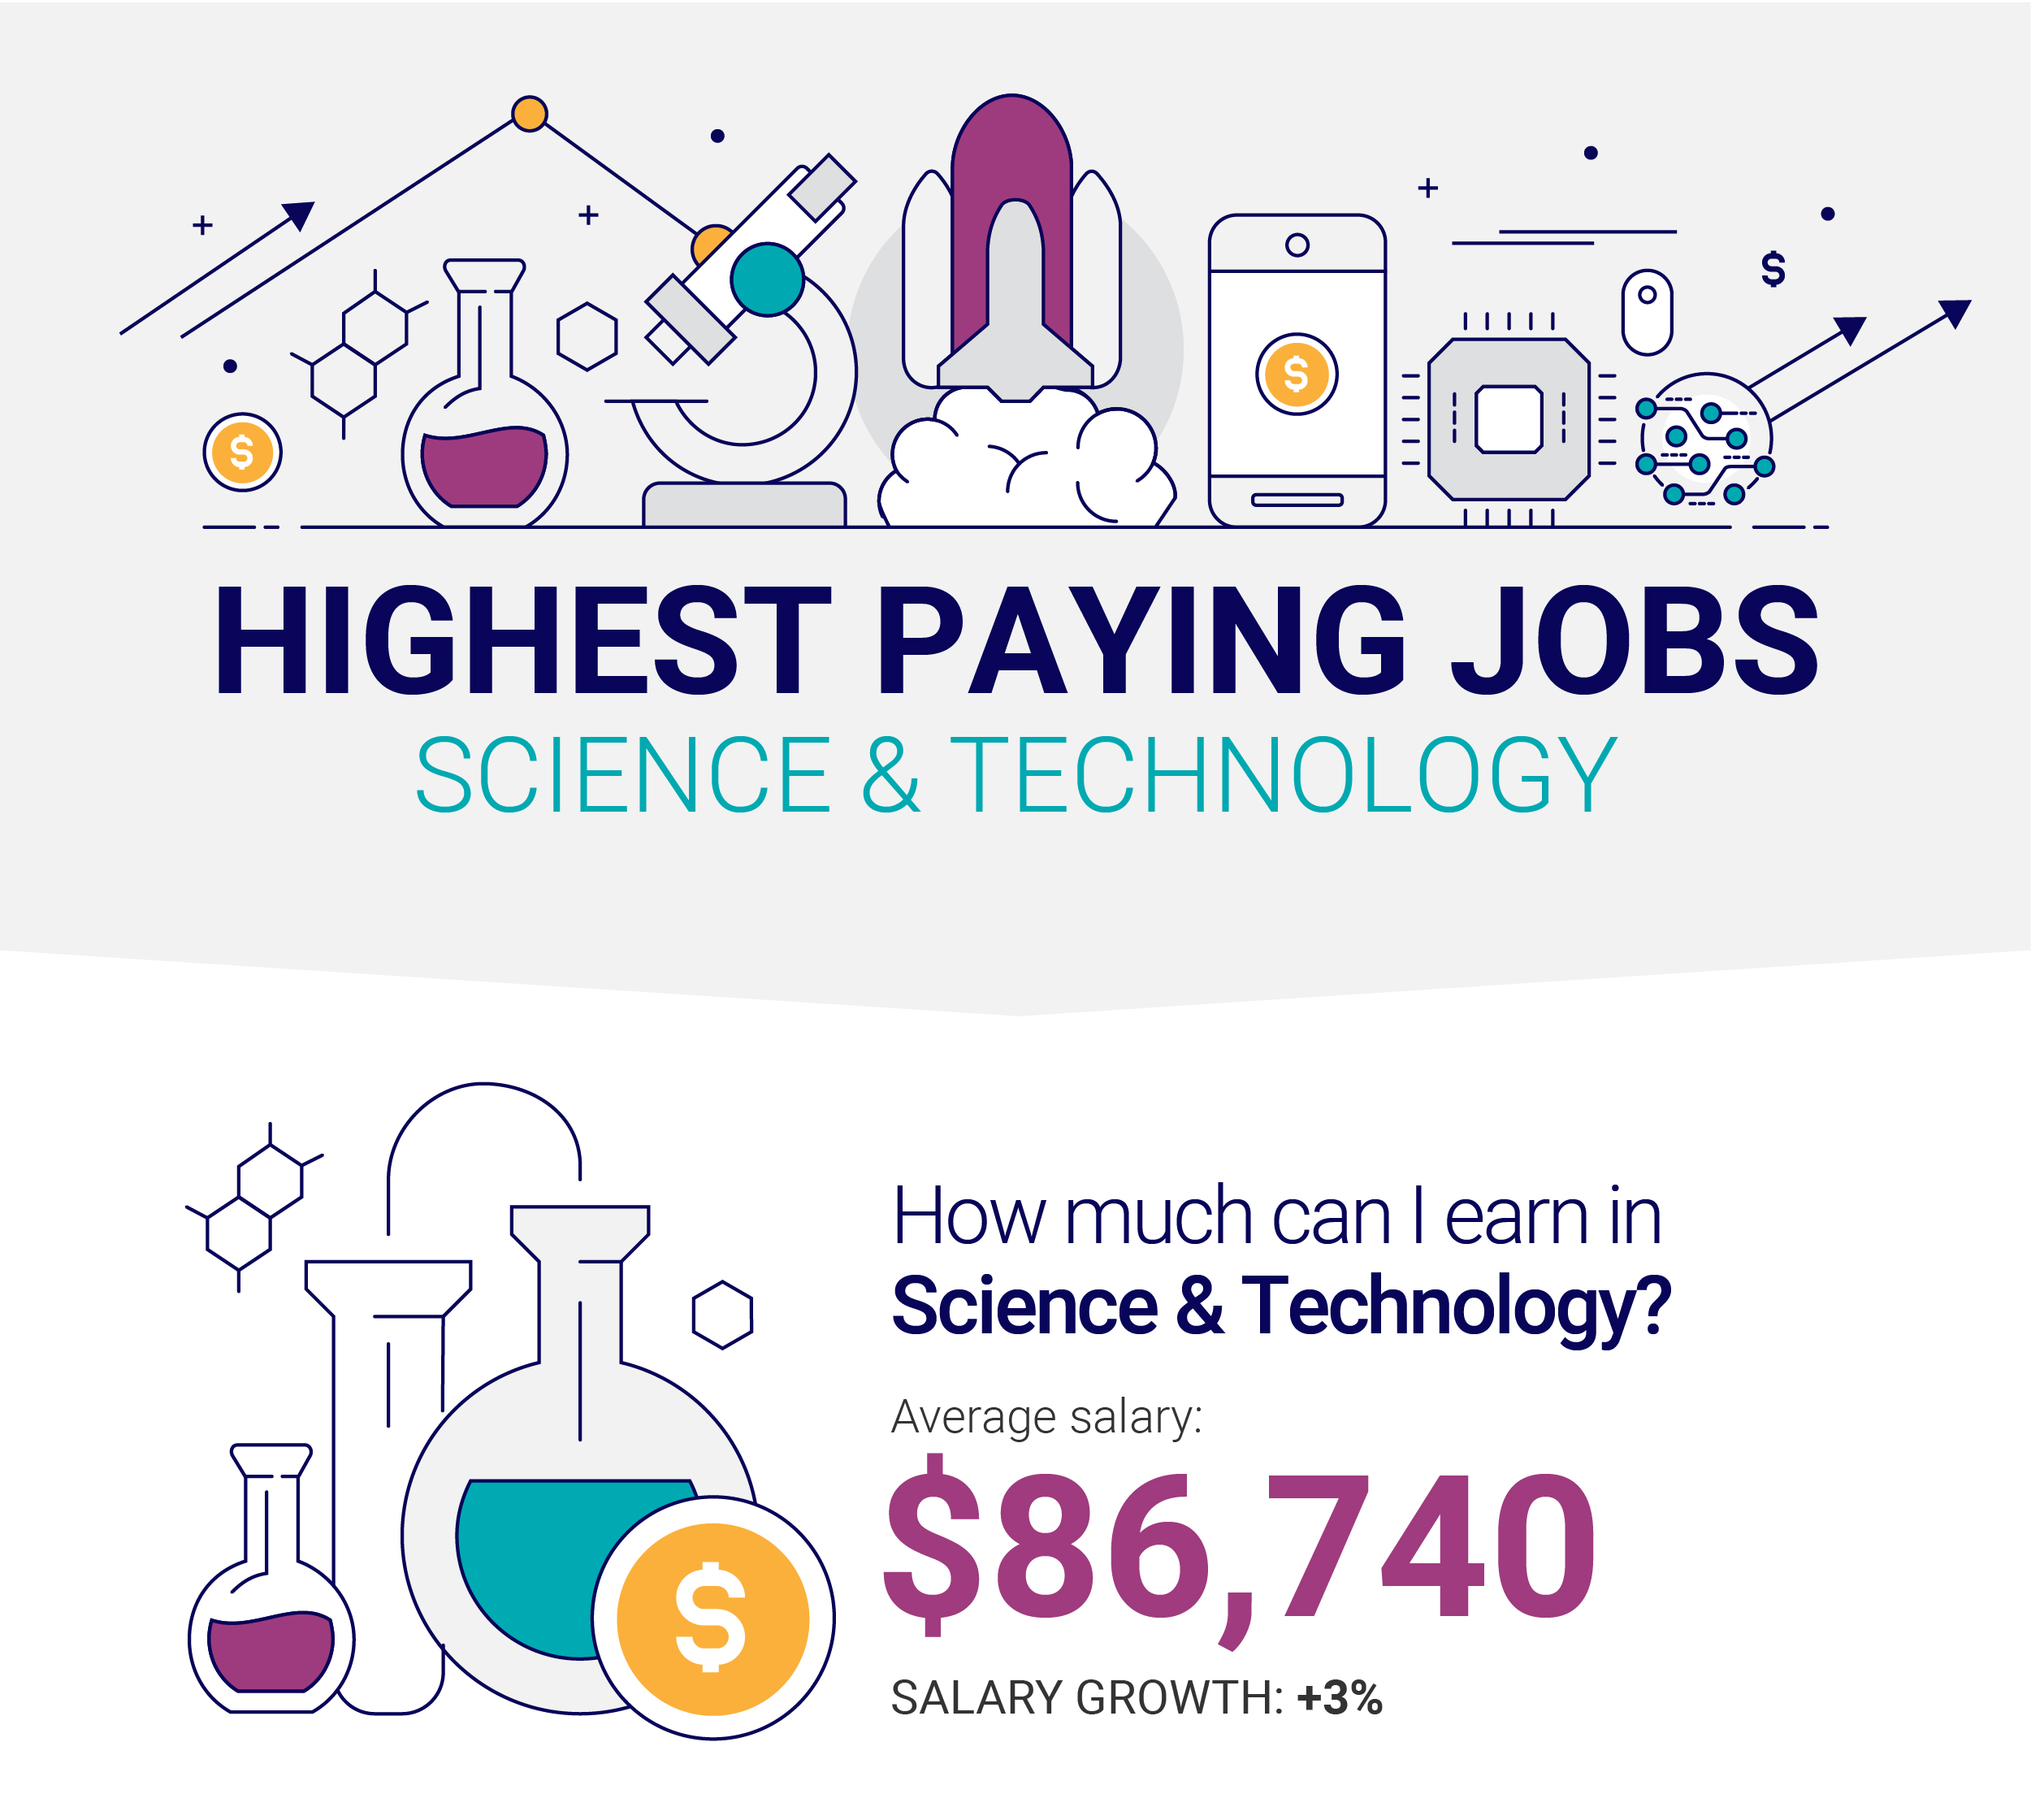 How much can I earn in Science & Technology?